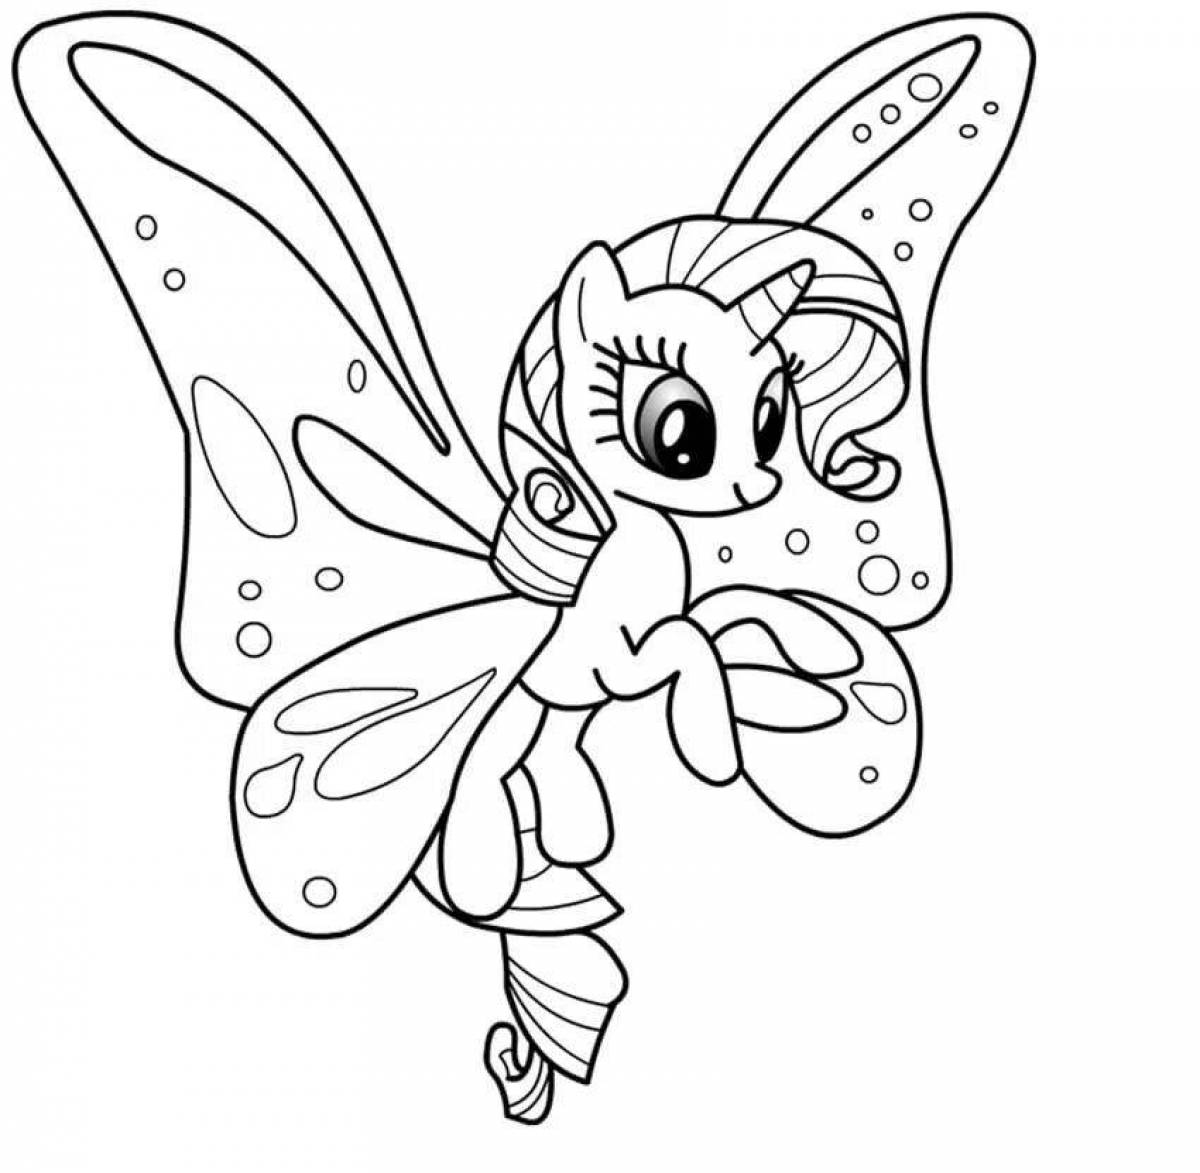 Charming pony coloring book with wings